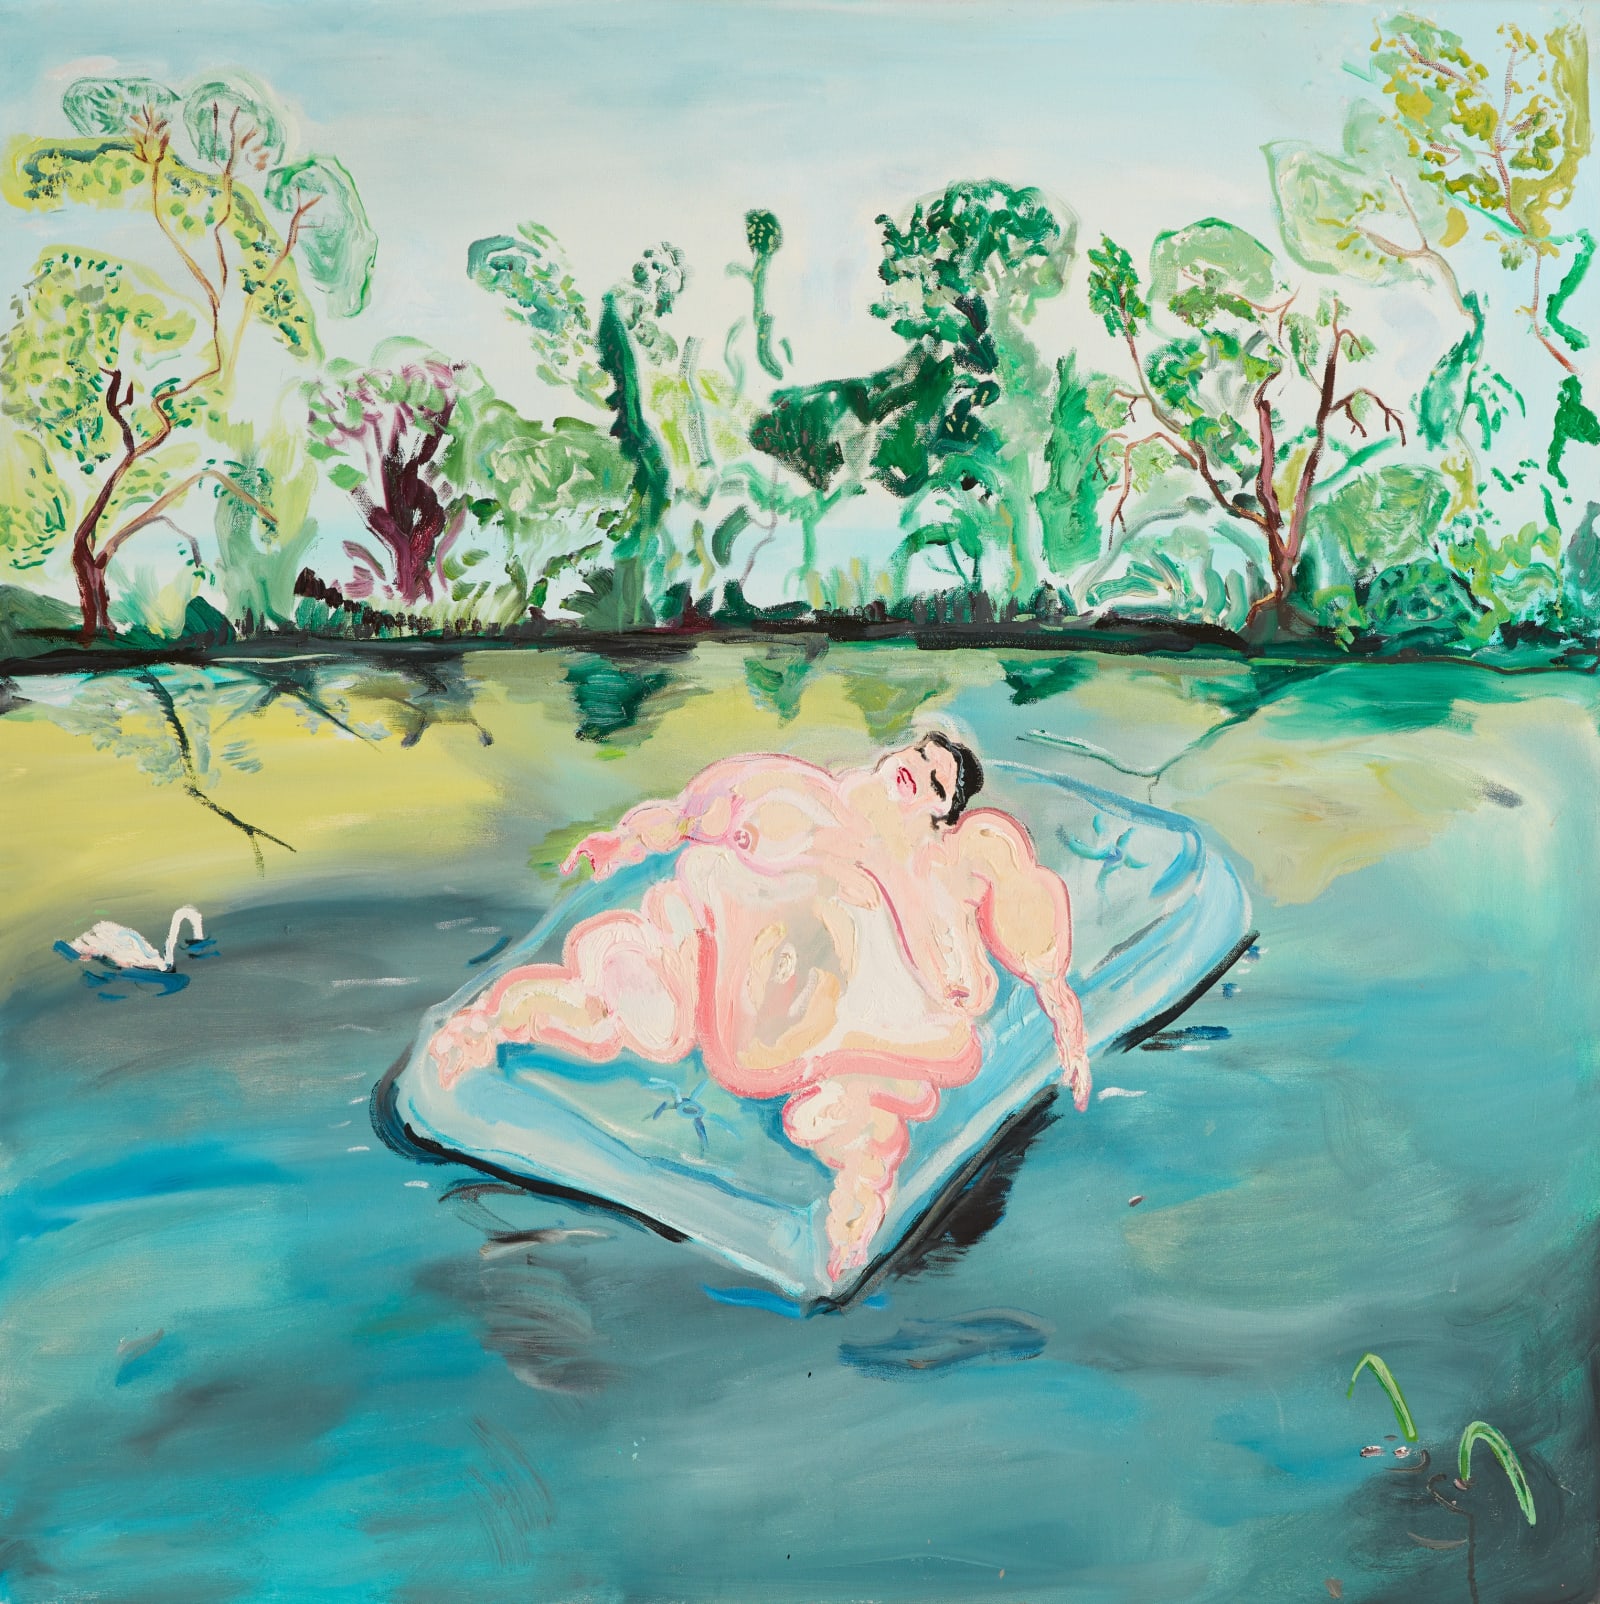 Sheila Rennick, Floating off, oil on canvas, 120 x 120cm, 2020 | Sheila Rennick: Screaming on Mute | Thursday 6 May – Saturday 5 June 2021 | Kevin Kavanagh